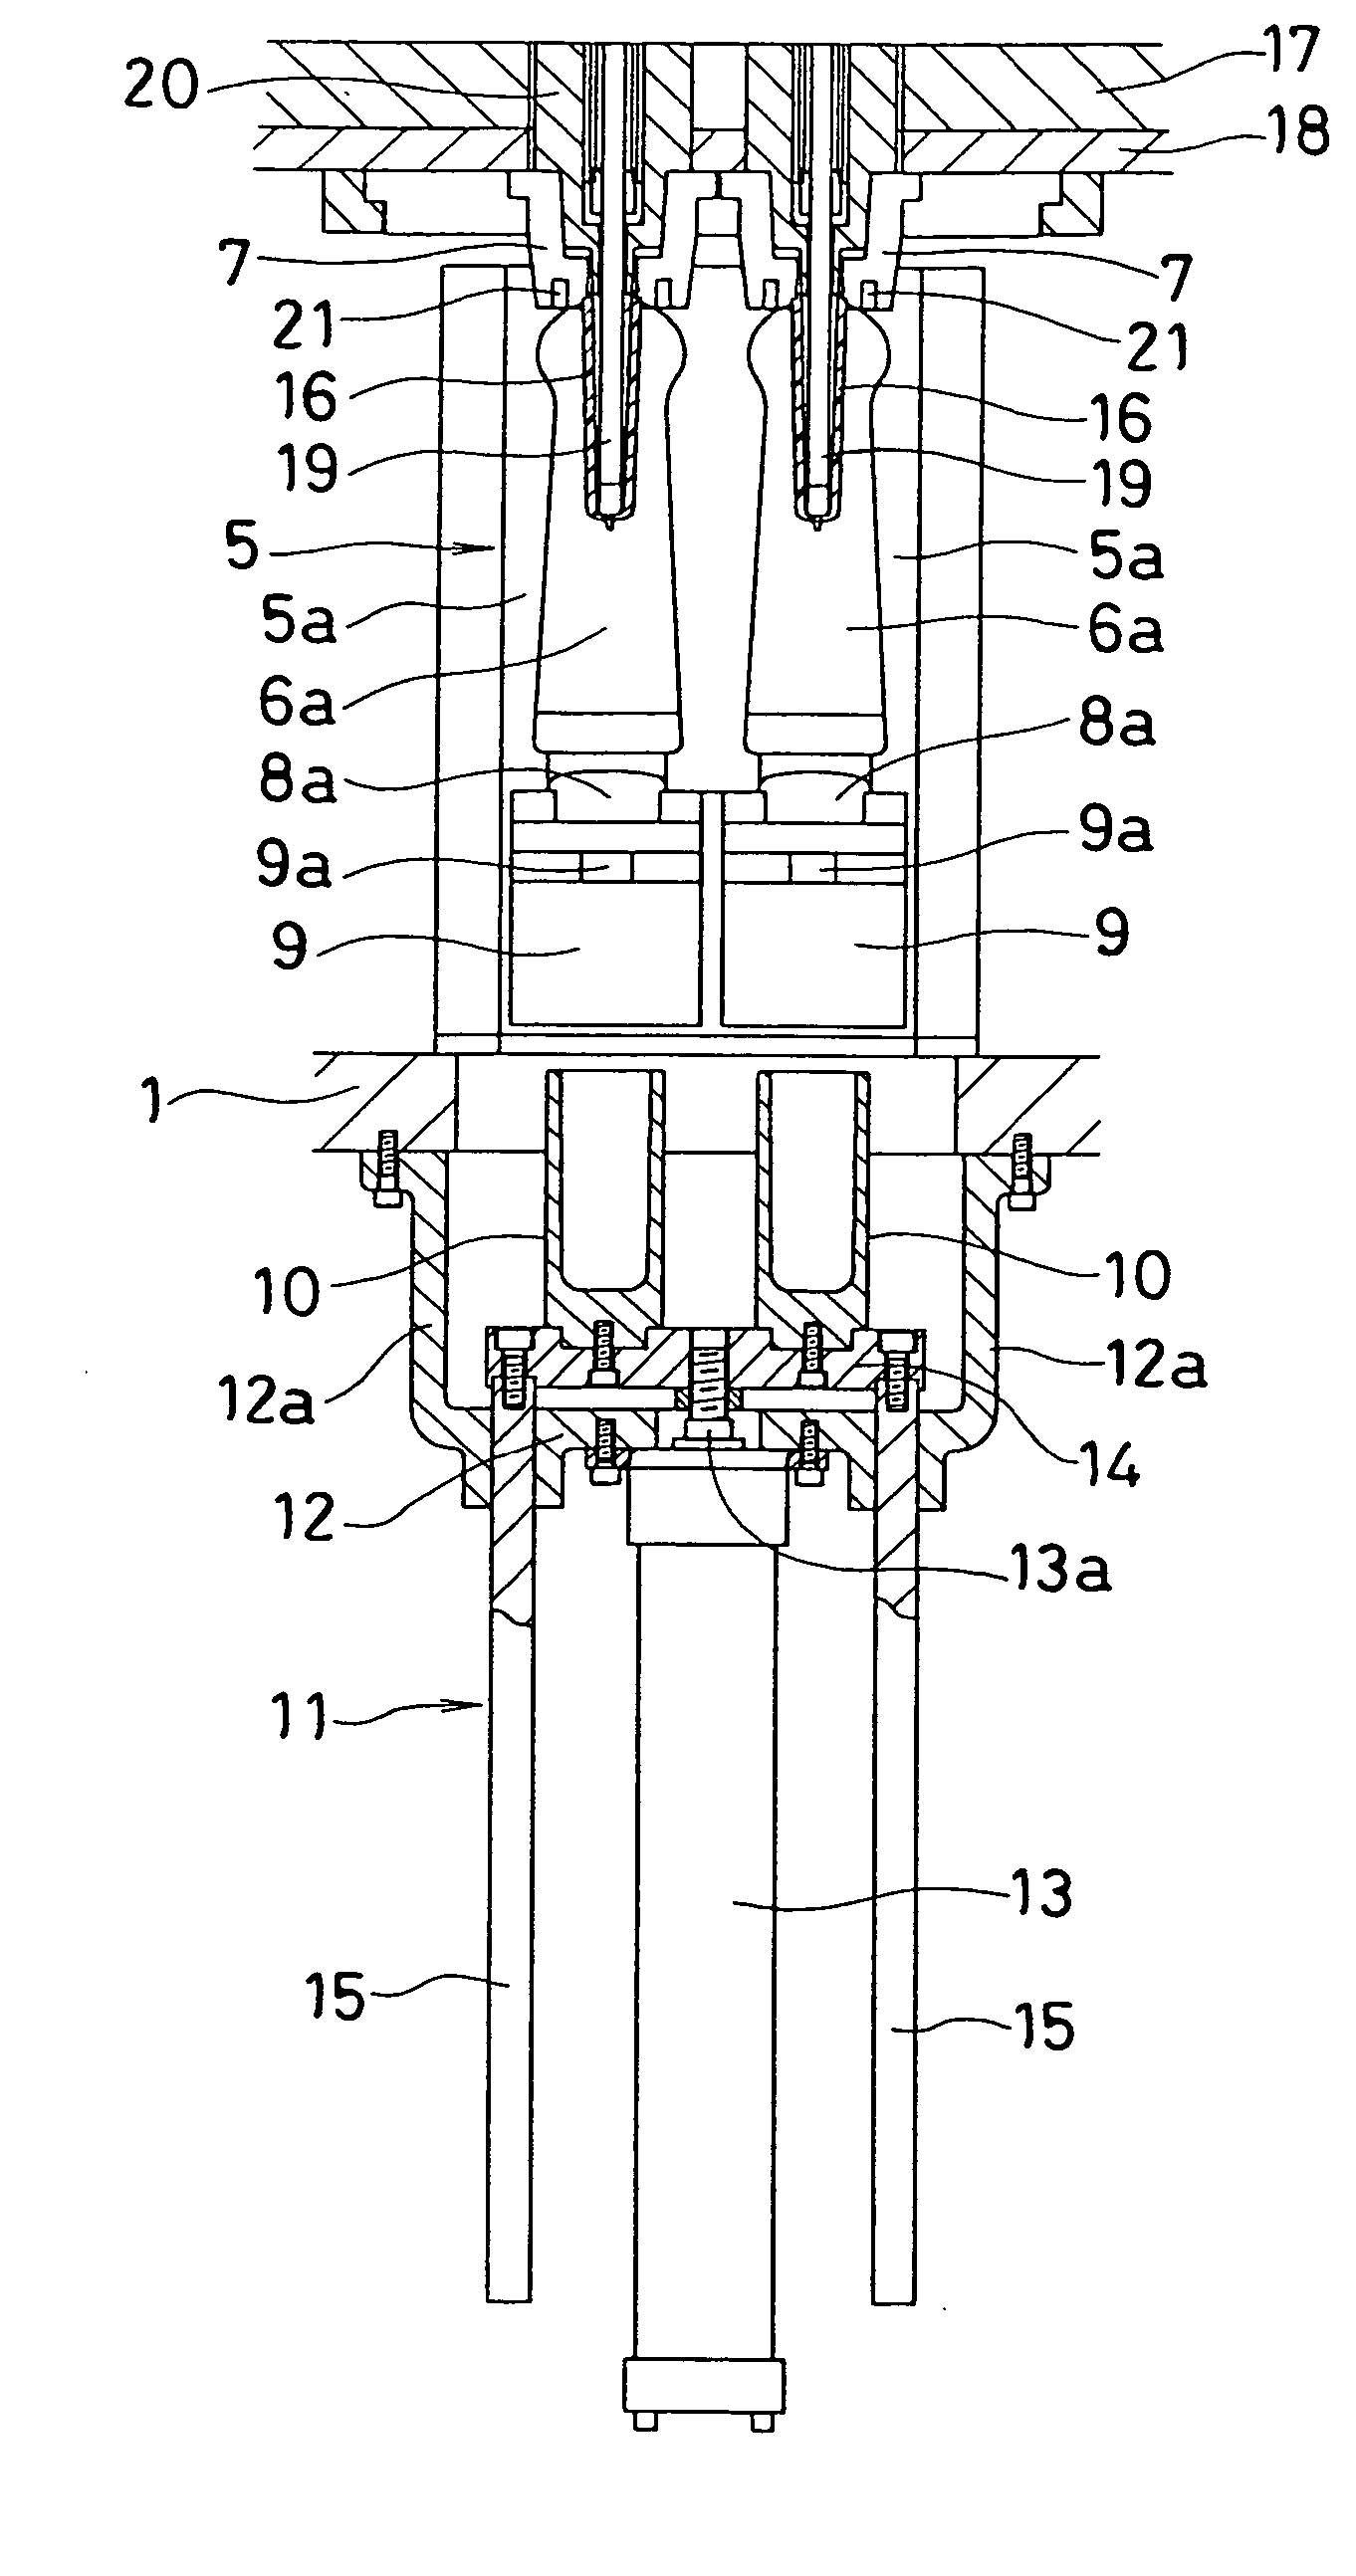 Mold device having a combination of molds for stretch blow molding